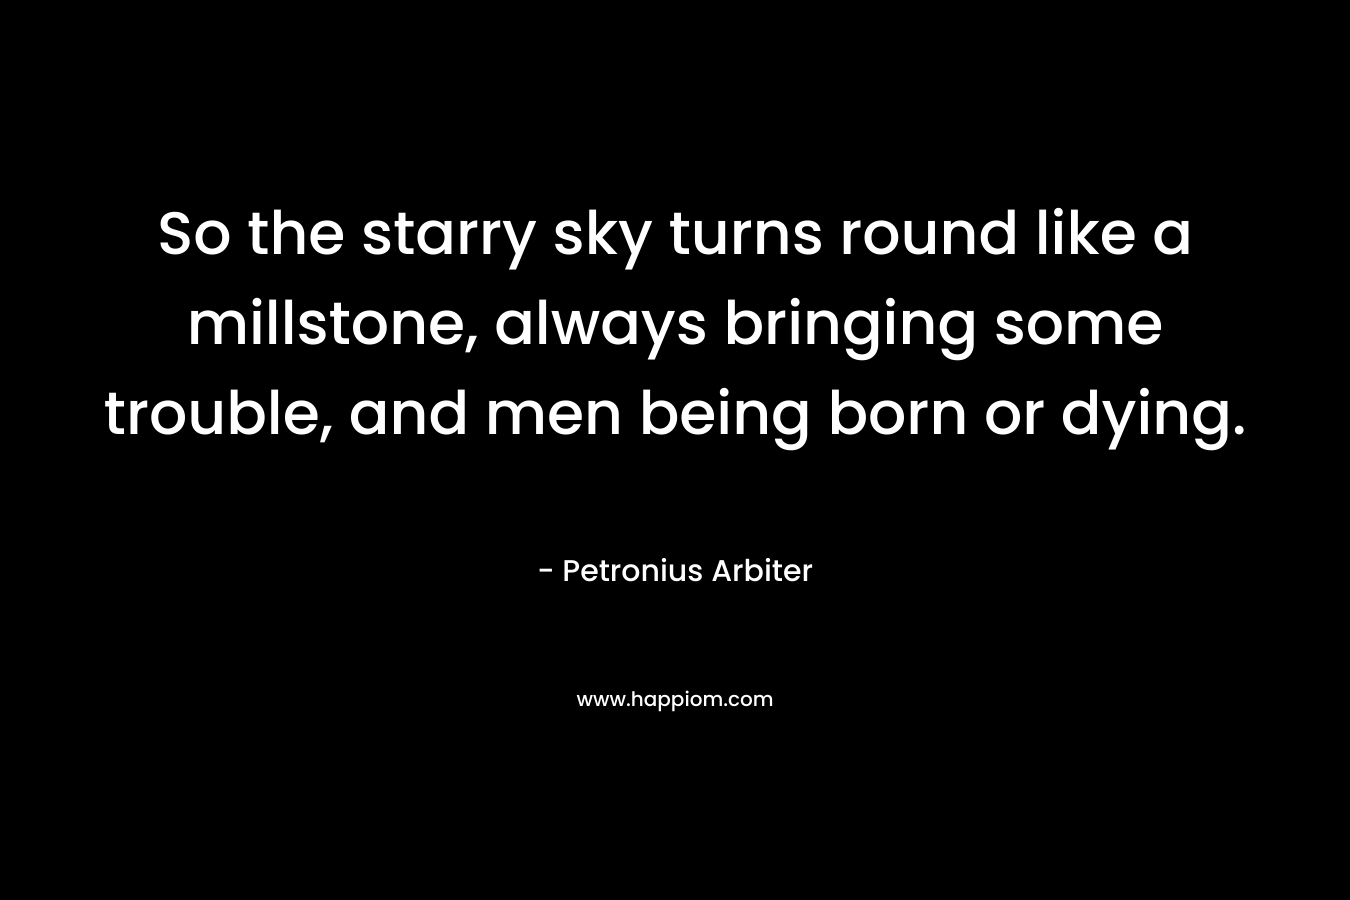 So the starry sky turns round like a millstone, always bringing some trouble, and men being born or dying. – Petronius Arbiter